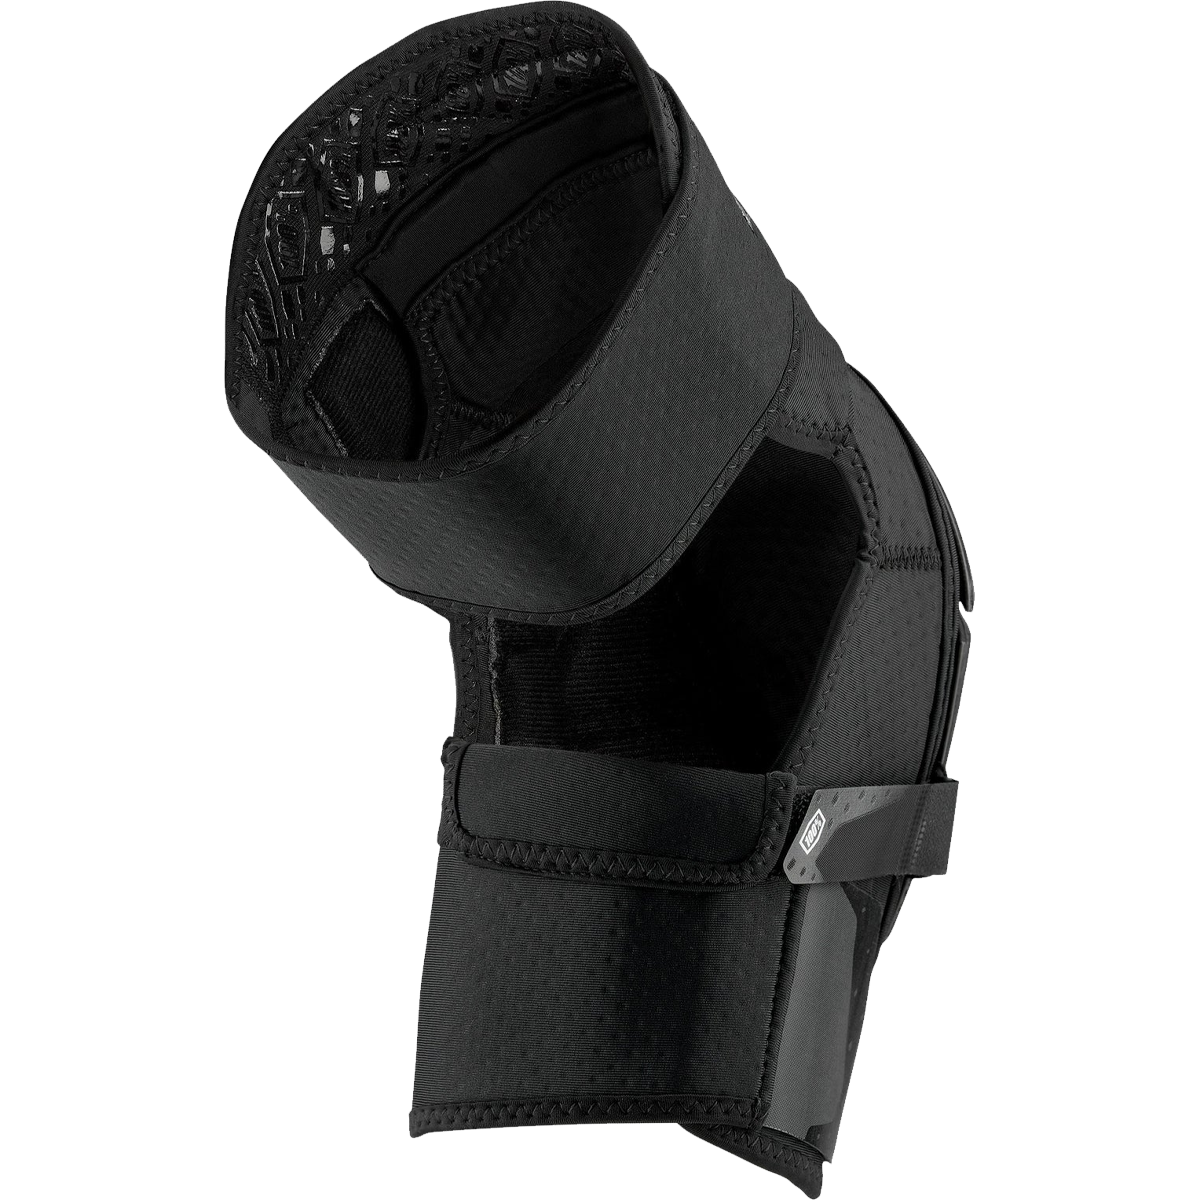 Fortis Knee Guards alternate view